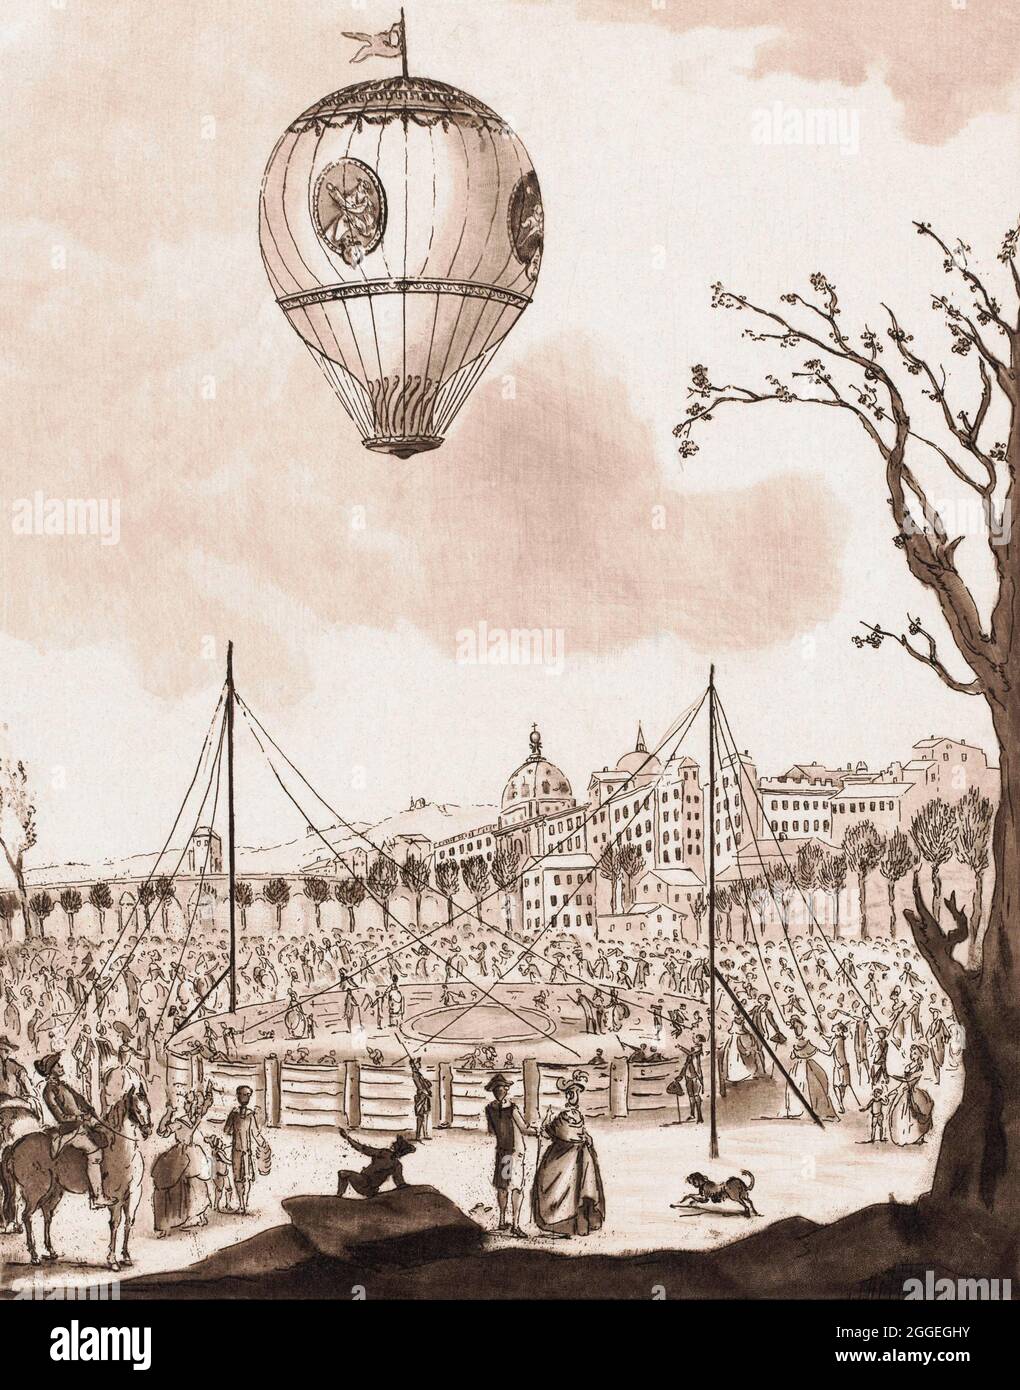 Hot air balloon flight on January 19, 1784 piloted by Joseph-Michel Montgolfier, 1740 – 1810 and Jean-François Pilâtre de Rozier, 1754 - 1785 and five others.  The balloon named Le Flesselles was launched from Lyon, France.  It was one of the biggest balloons ever launched, including to this day, with a volume of around 19,800 cubic meters (around 700.000 cubic feet.)  Le Flesselle only managed to fly for 13 minutes before beginning to leak its hot air.  It landed safely with no one injured. Stock Photo